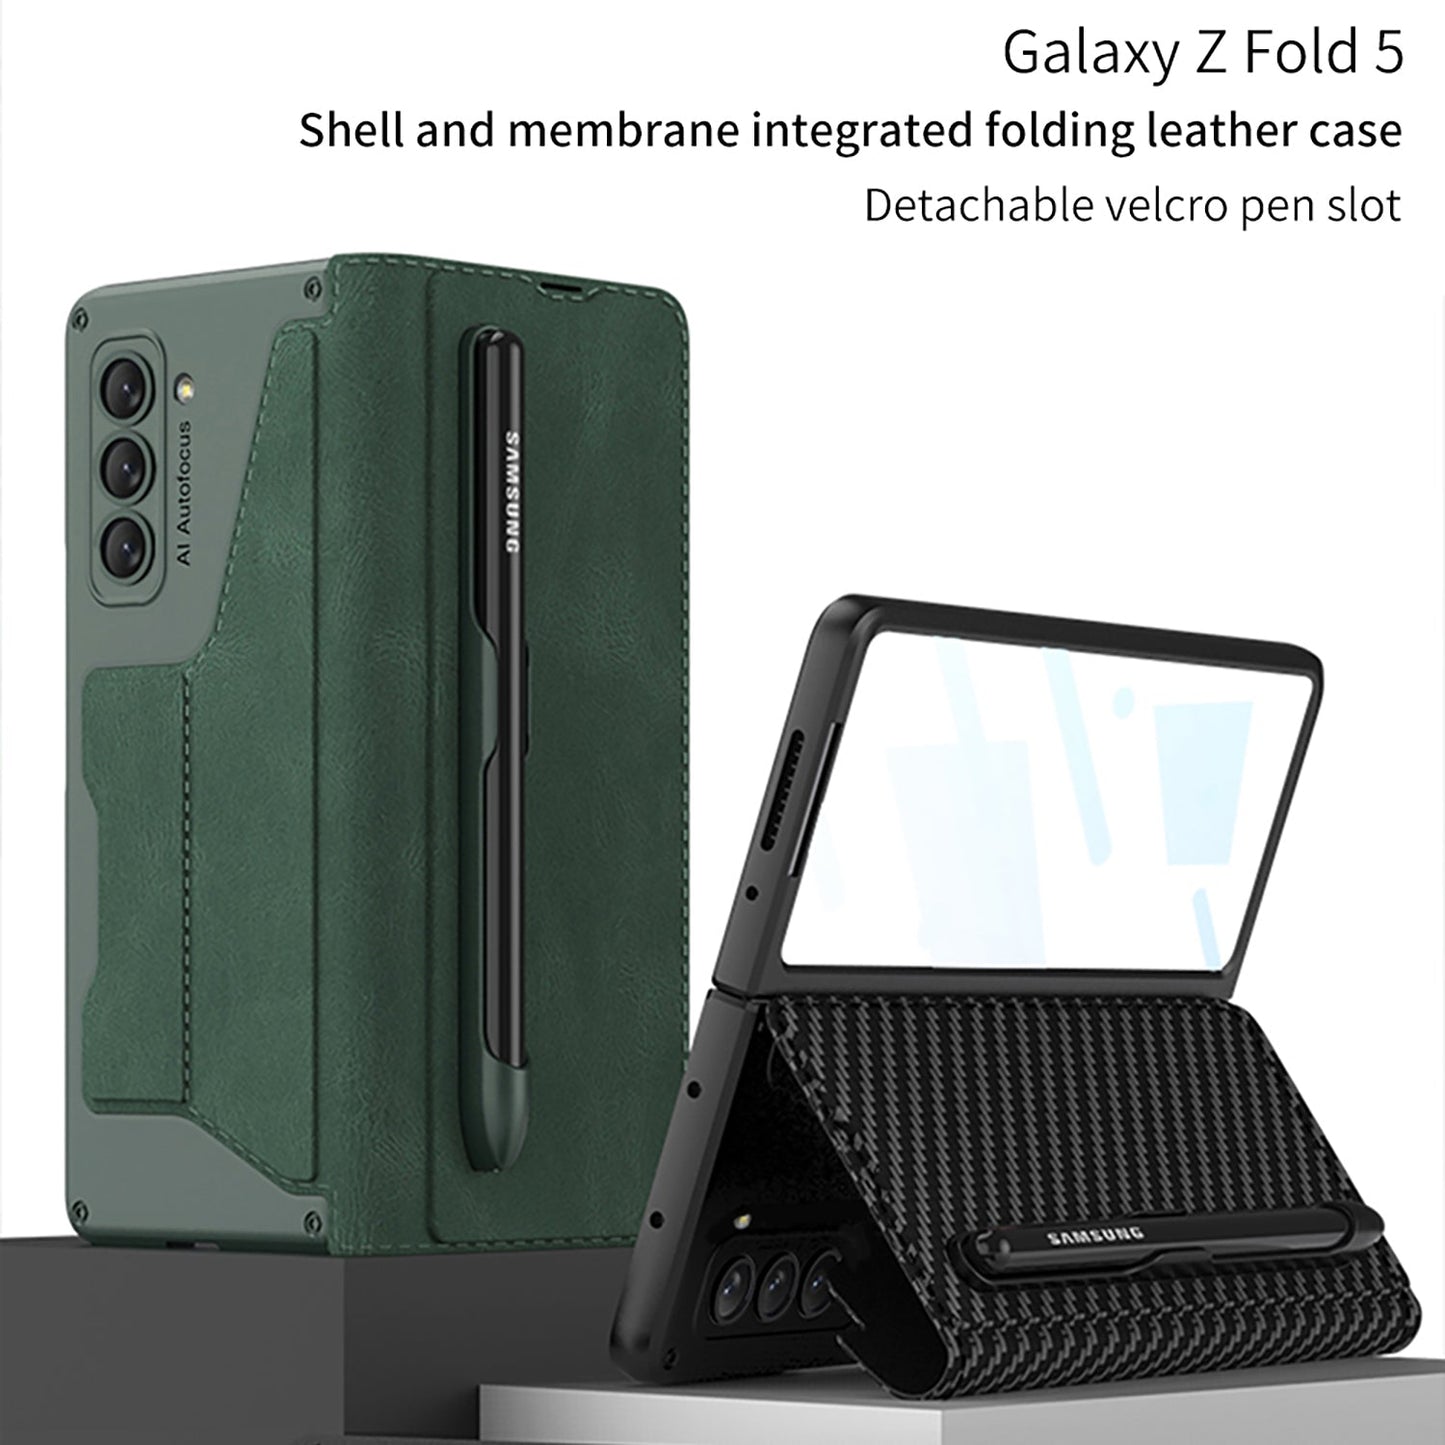 Leather Pen Holder Armor Phone Case With Back Screen Protector For Samsung Galaxy Z Fold5 Fold4